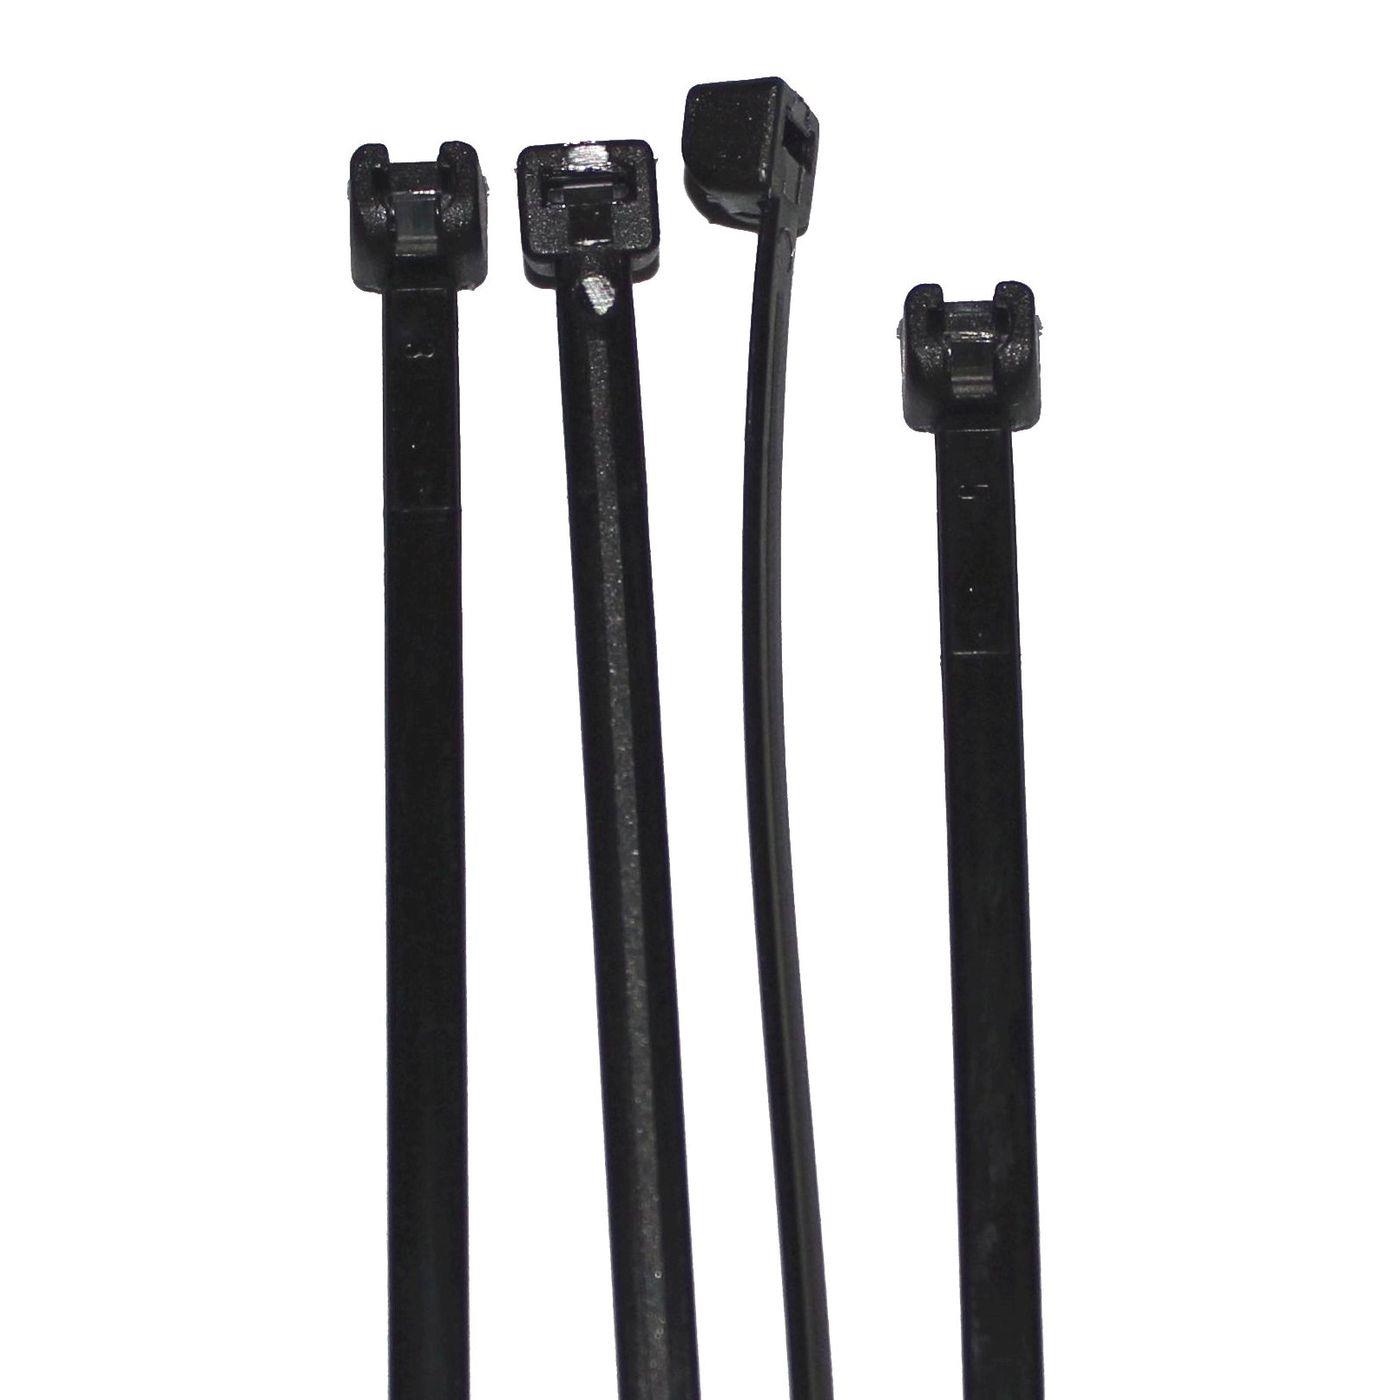 100x Cable tie with Metal tongue 140 x 3,5mm Black 40kg PA6.6 Polyamide Industrial quality